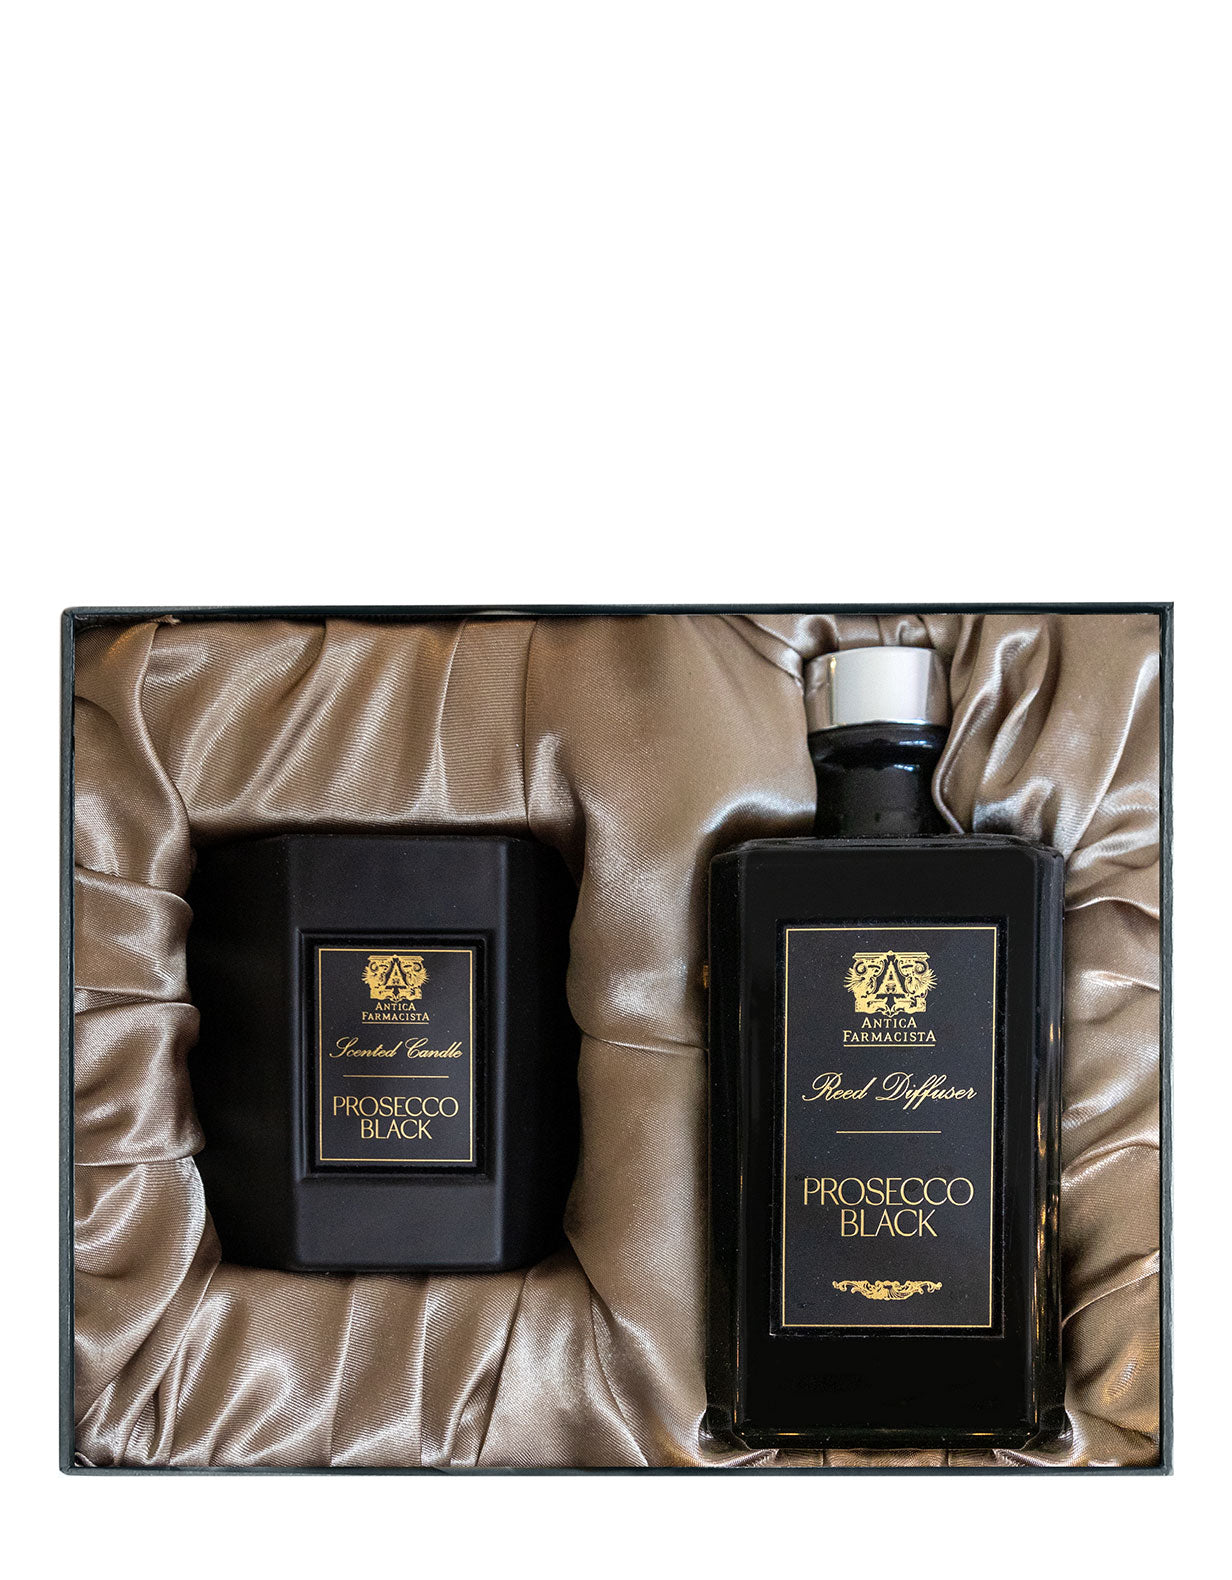 Prosecco Black Home Ambiance Gift Set